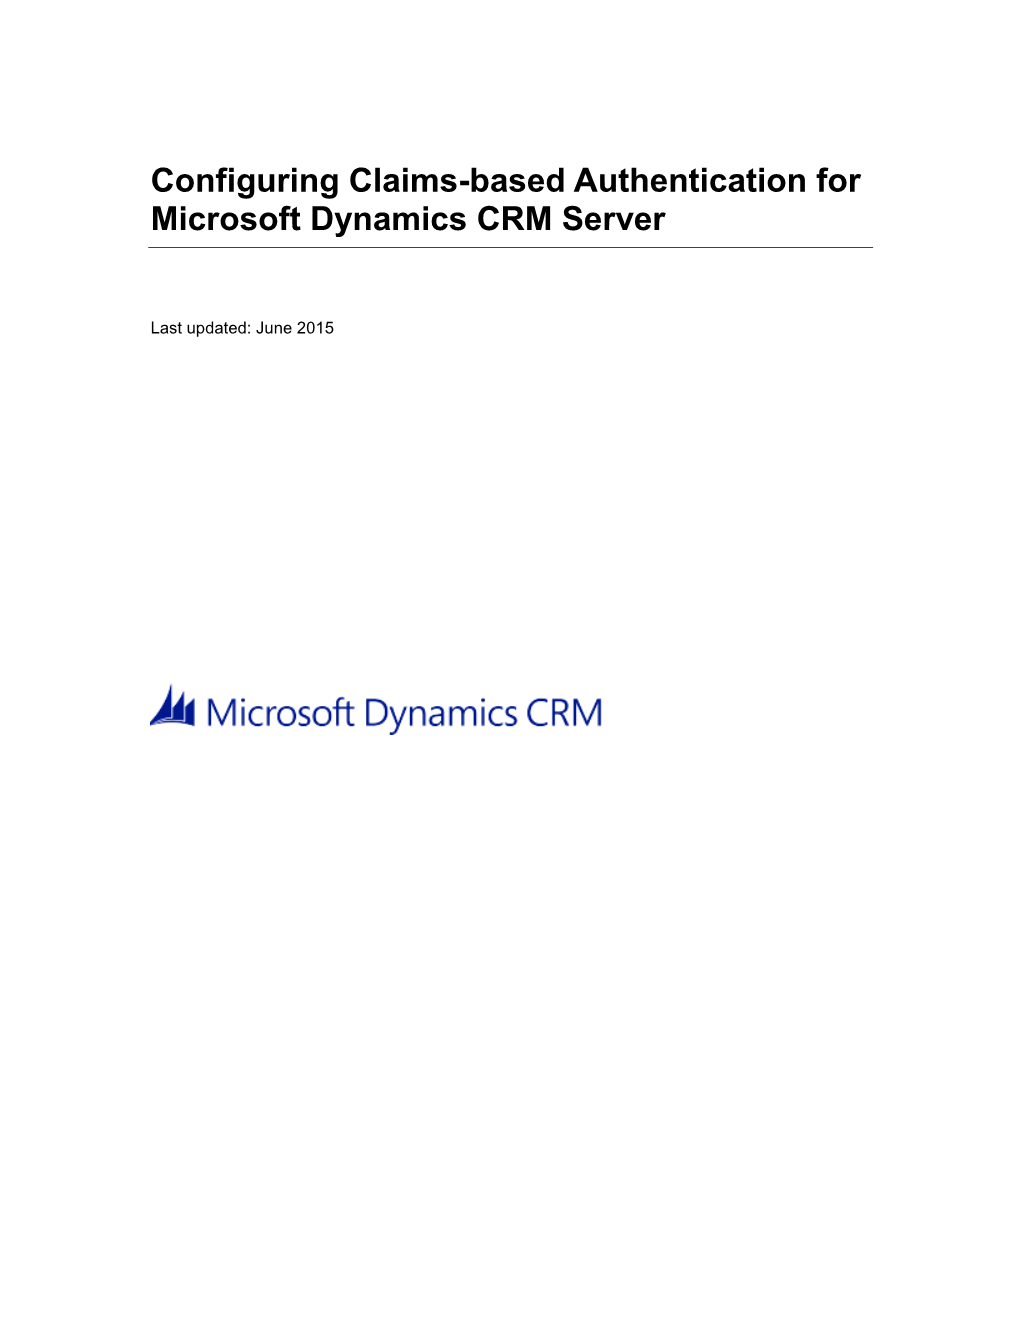 Configure Claims-Based Authentication for Microsoft Dynamics CRM Server